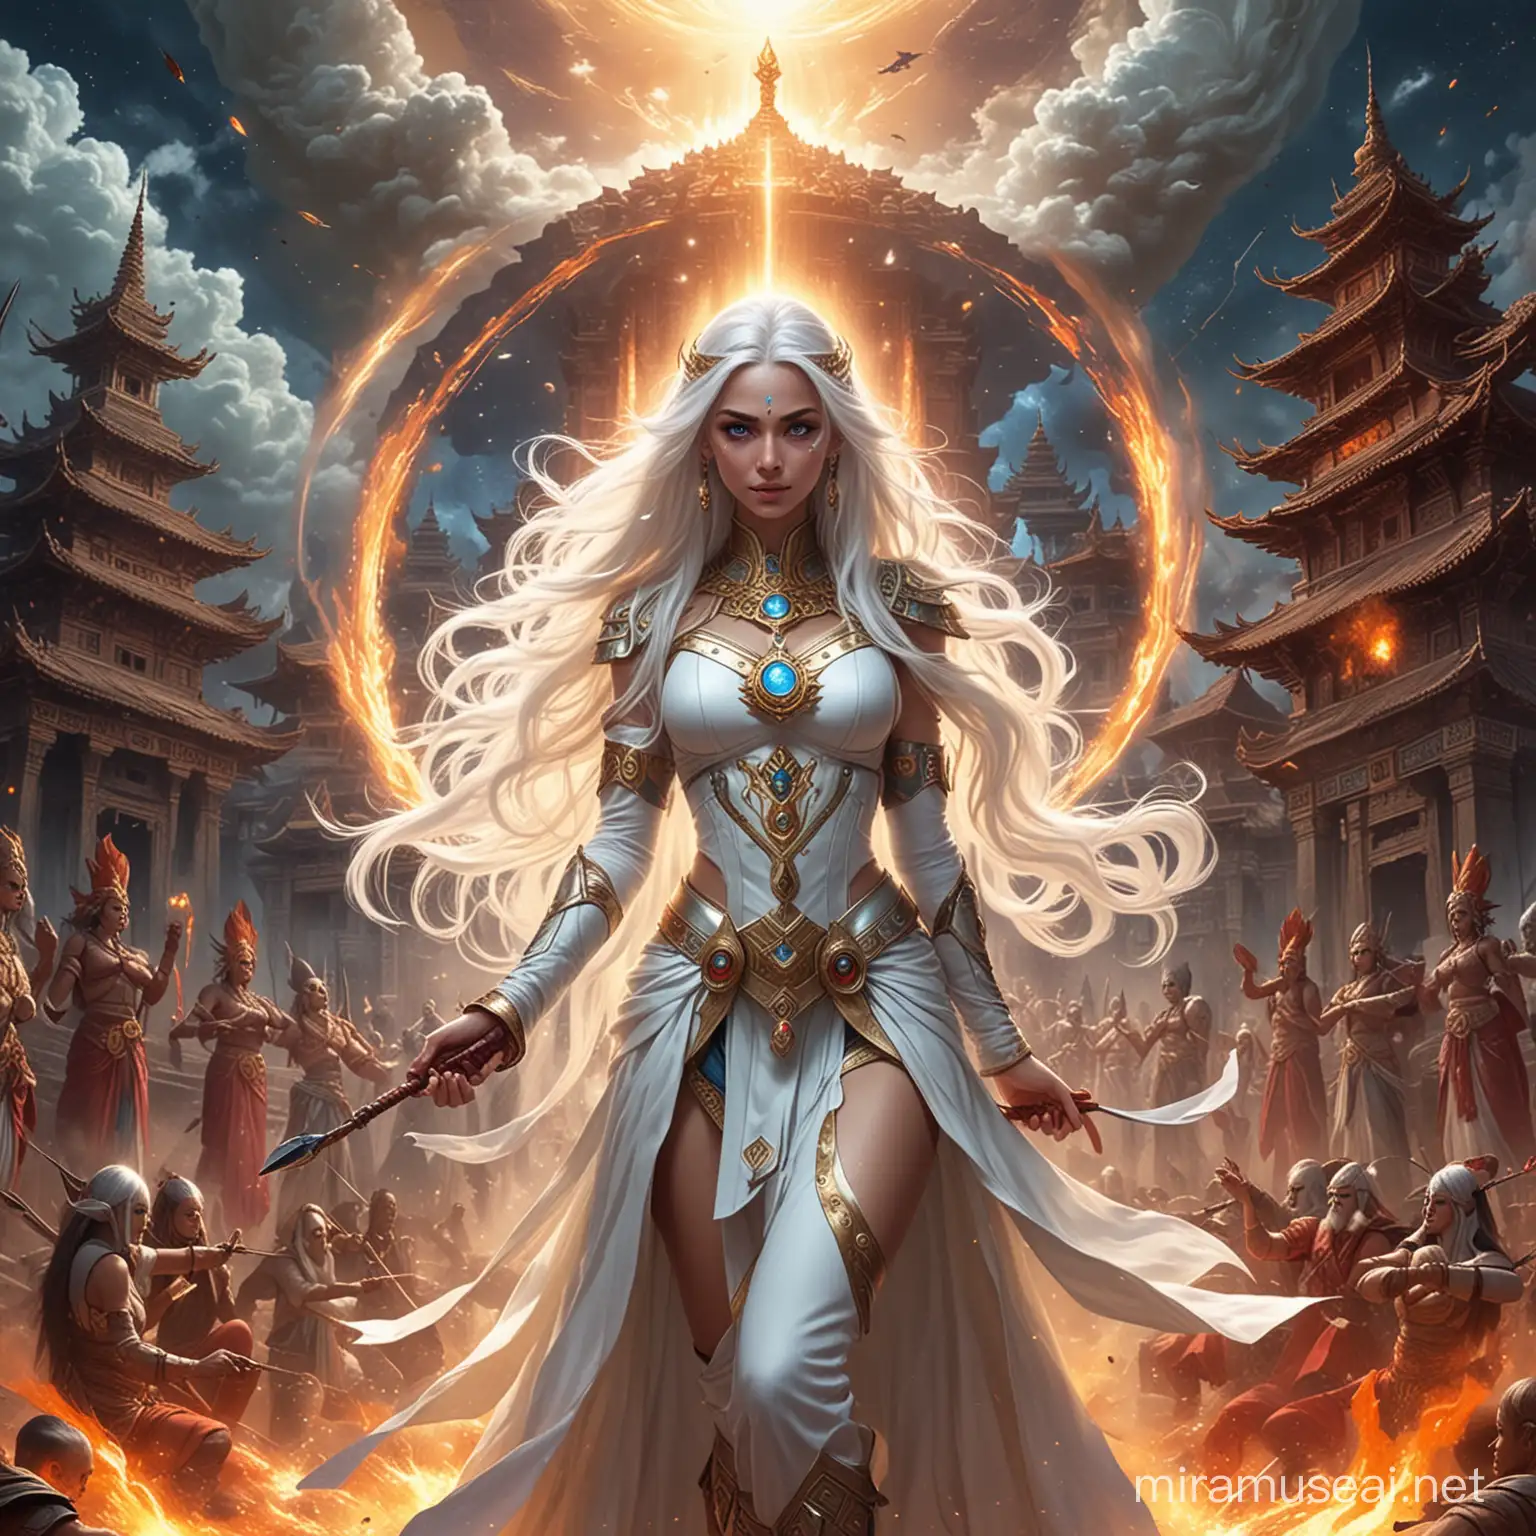 Powerful Young Empress Goddess Surrounded by Cosmic Energy and Fire